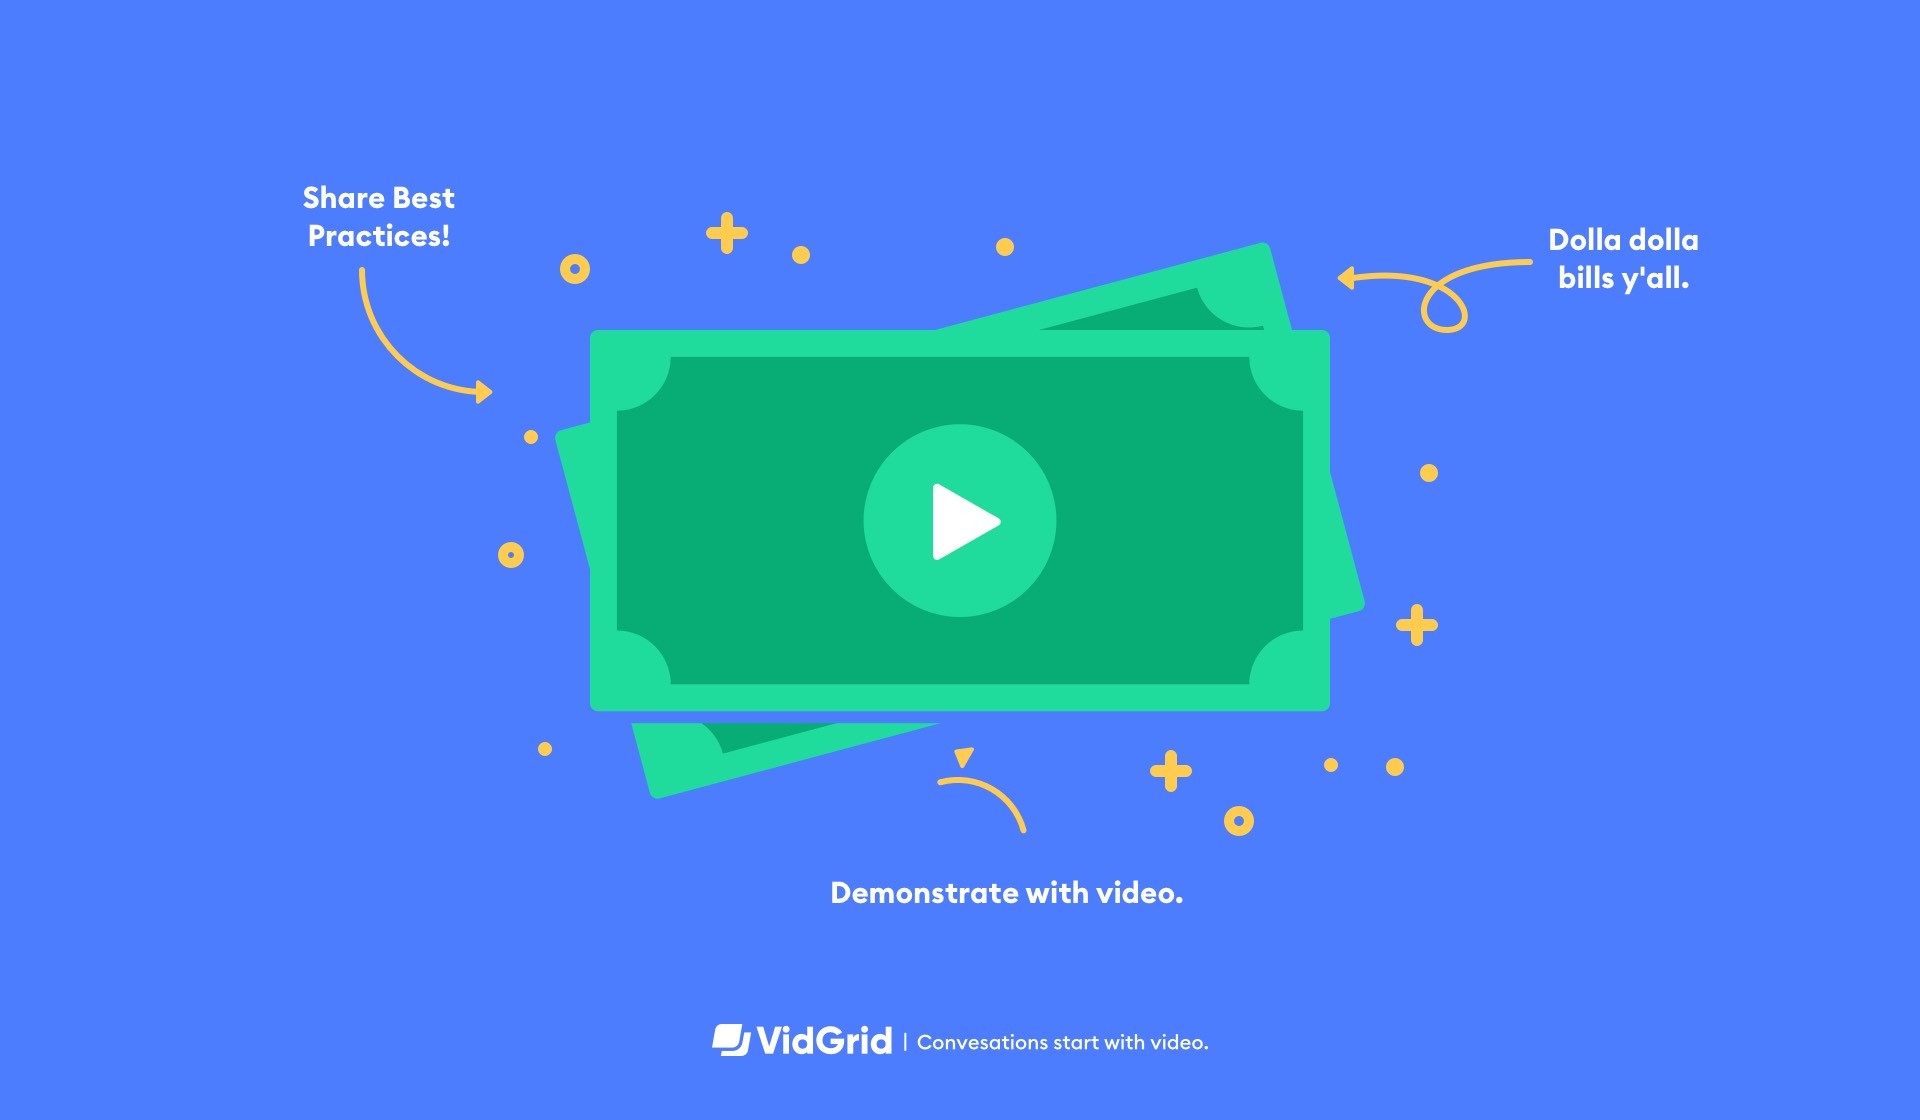 Expand Accounts with Personalized Videos